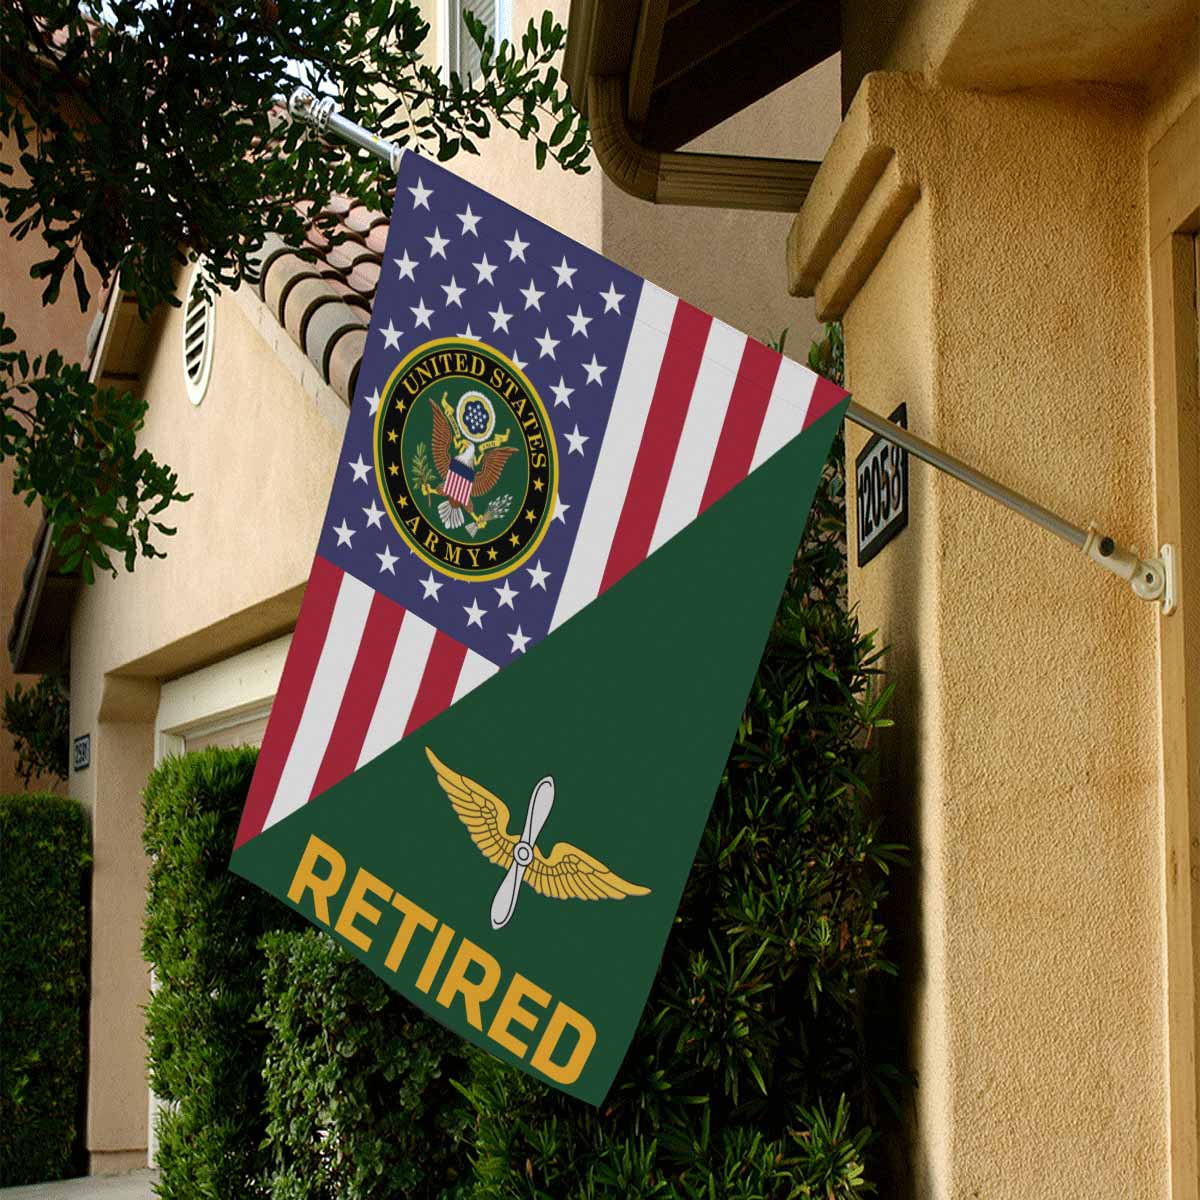 US Army Aviation Retired House Flag 28 Inch x 40 Inch Twin-Side Printing-HouseFlag-Army-Branch-Veterans Nation